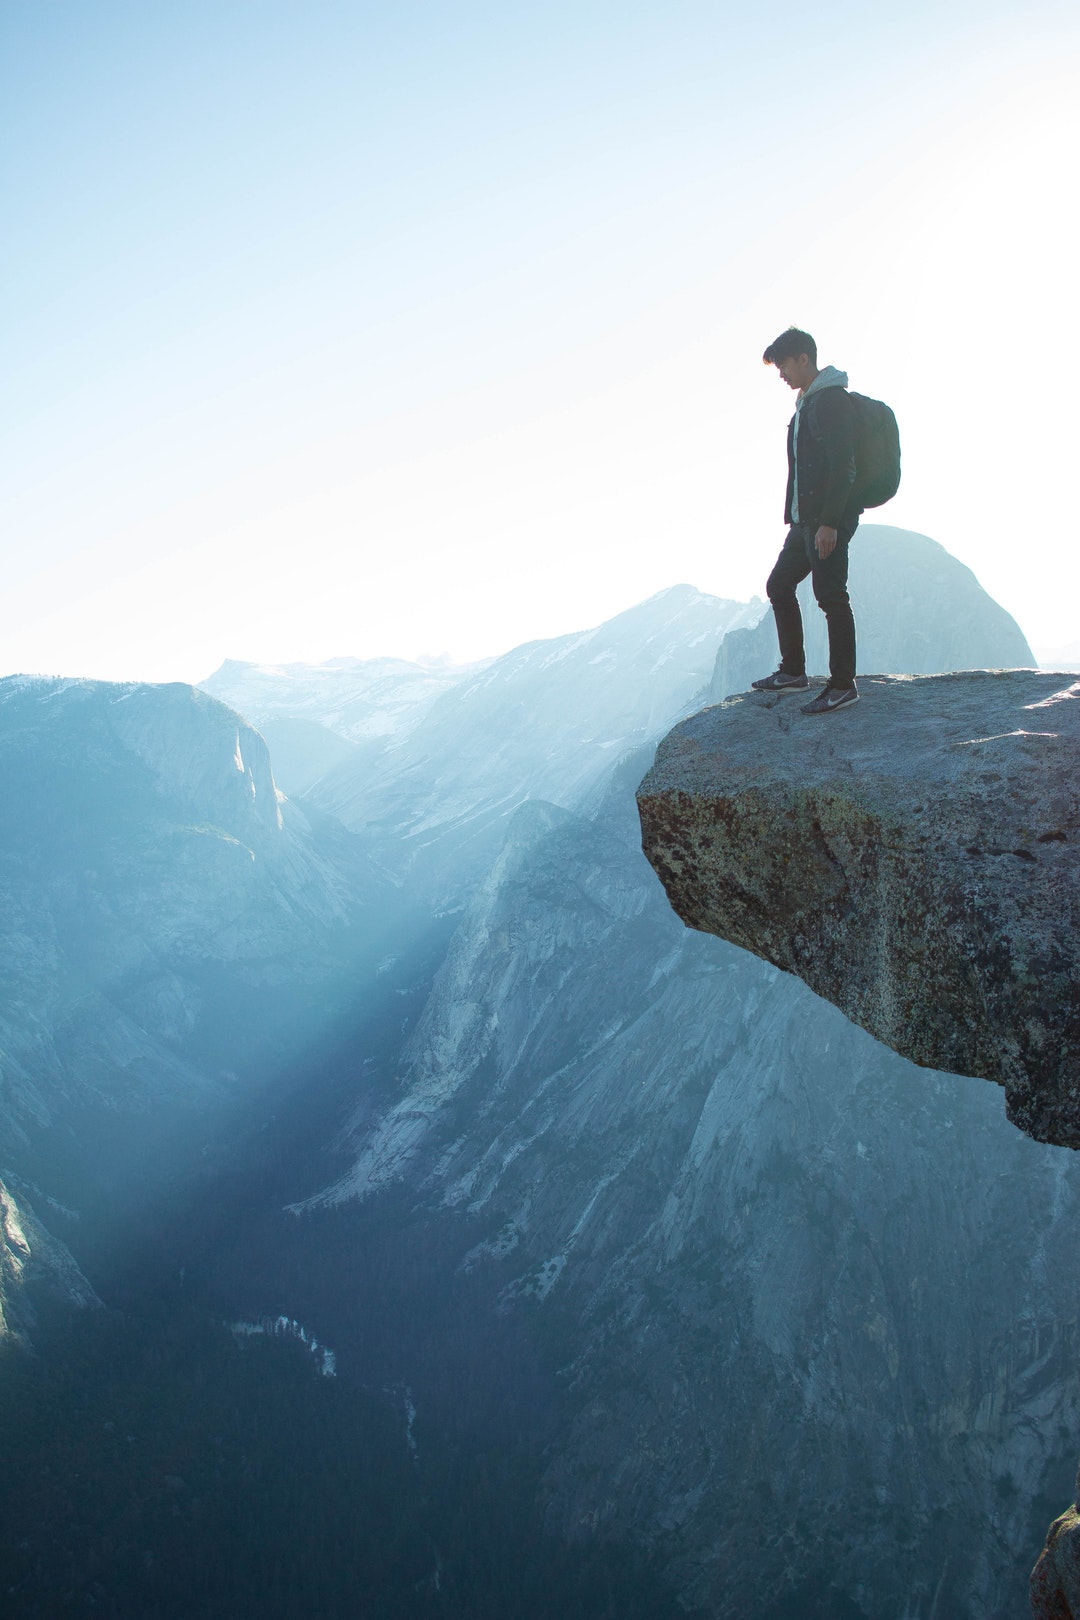 A man with a backpack approaching the edge of a ledge over a precipice